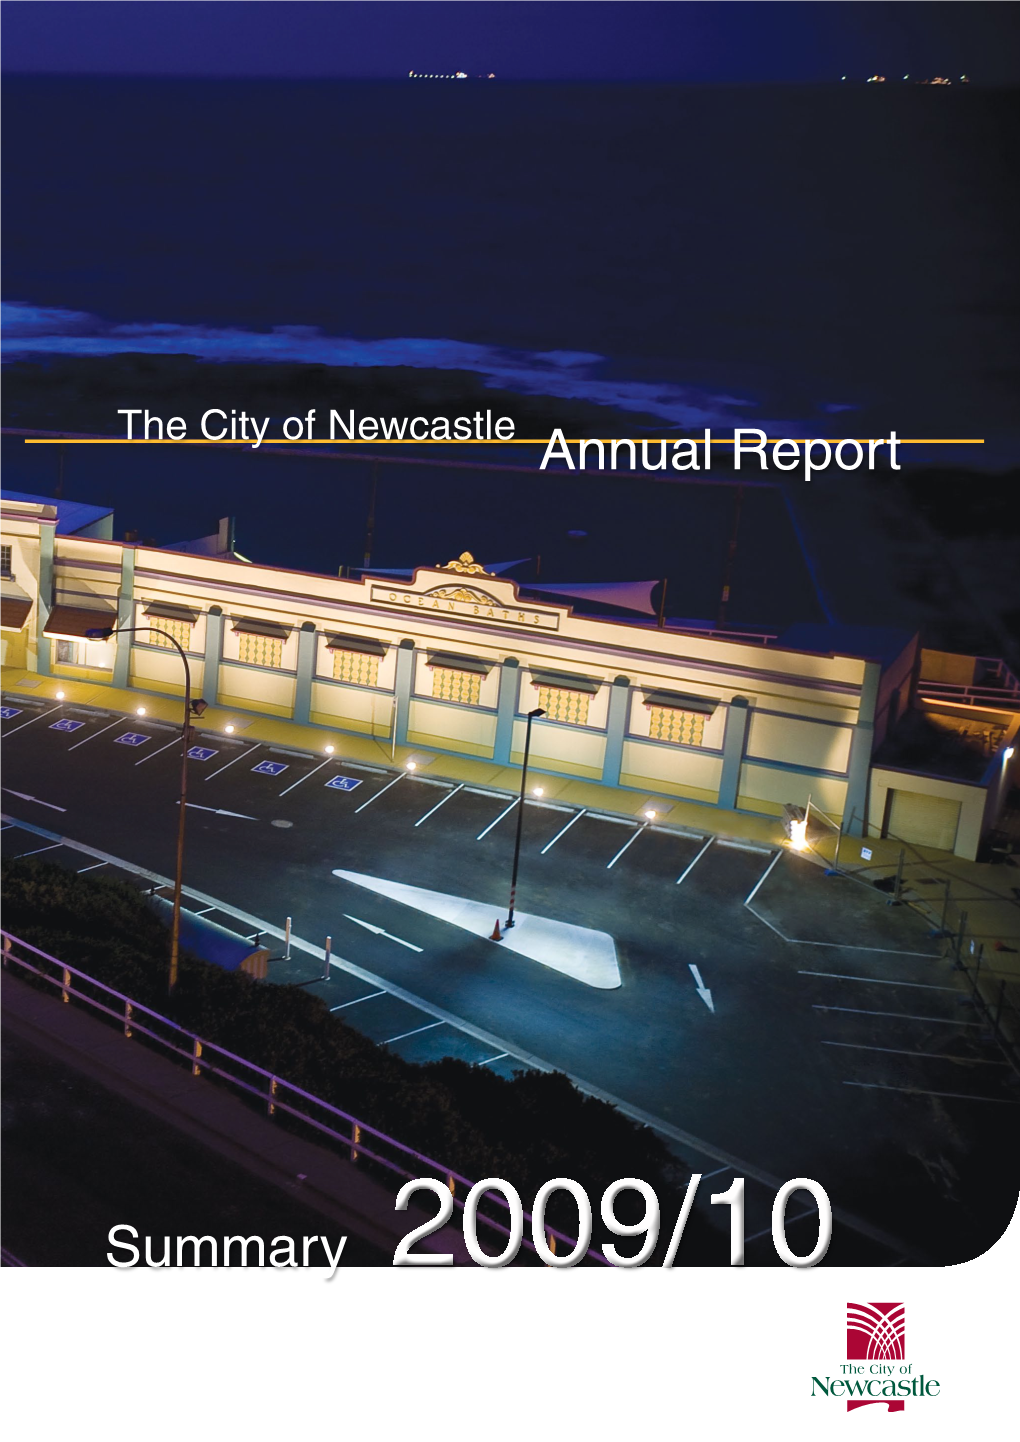 Annual Report Summary - the City of Newcastle 2009/10 Annual Report Summary - the City of Newcastle 5 Our Vision Great Place, Great Lifestyle, Great Future